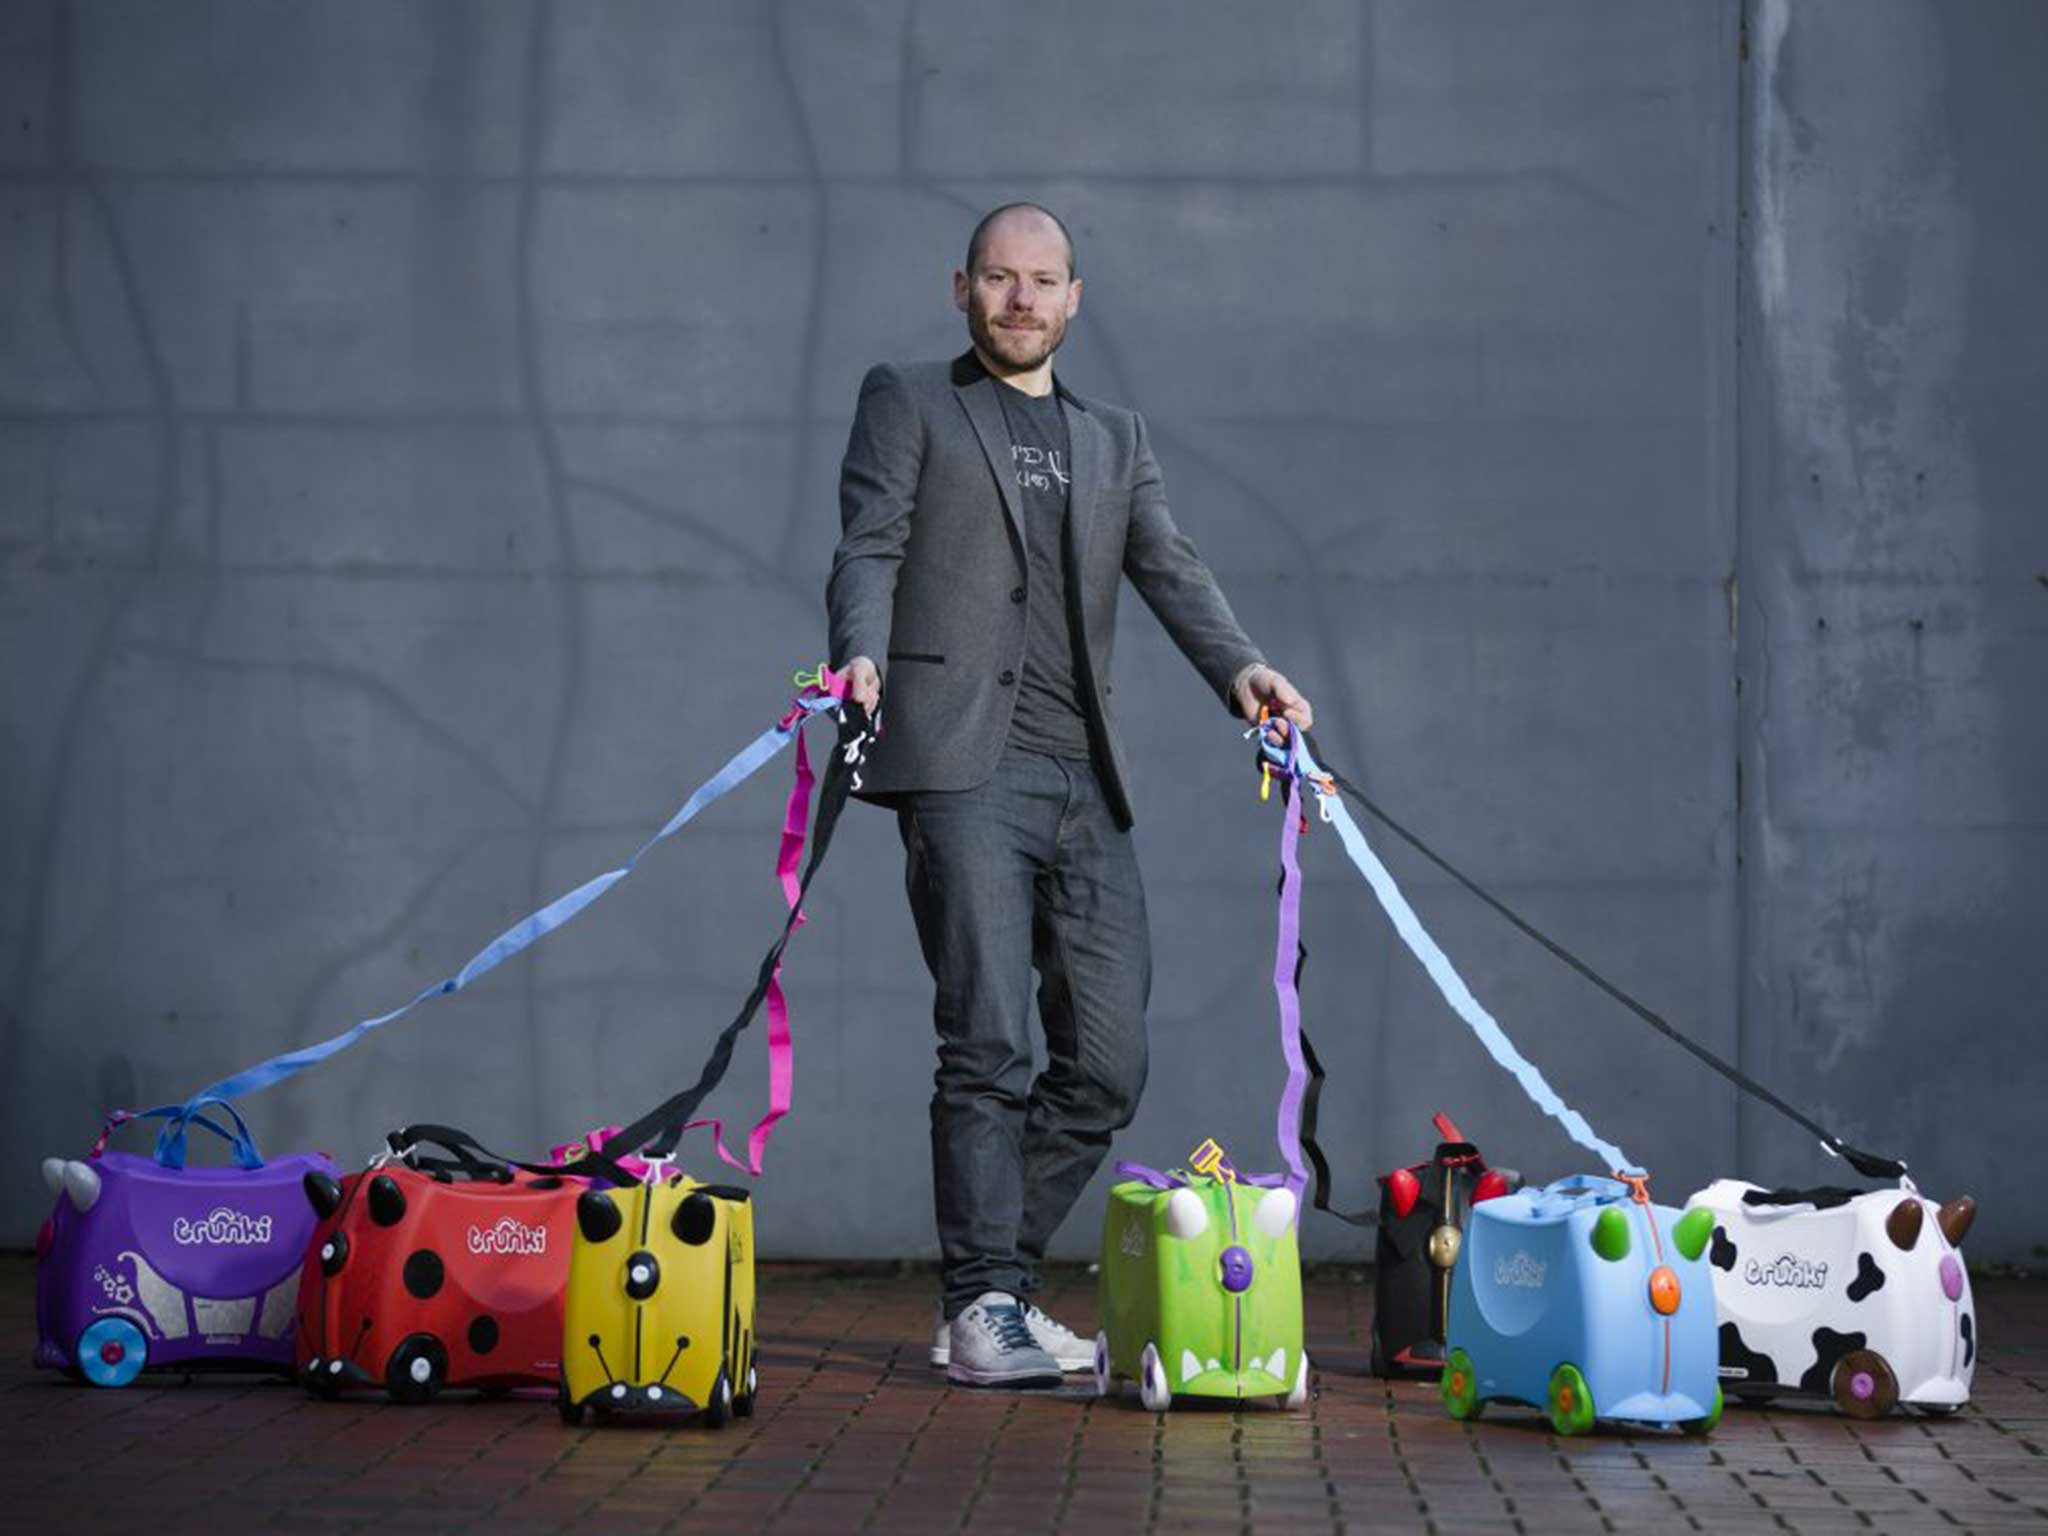 Trunki founder Rob Law with his creations